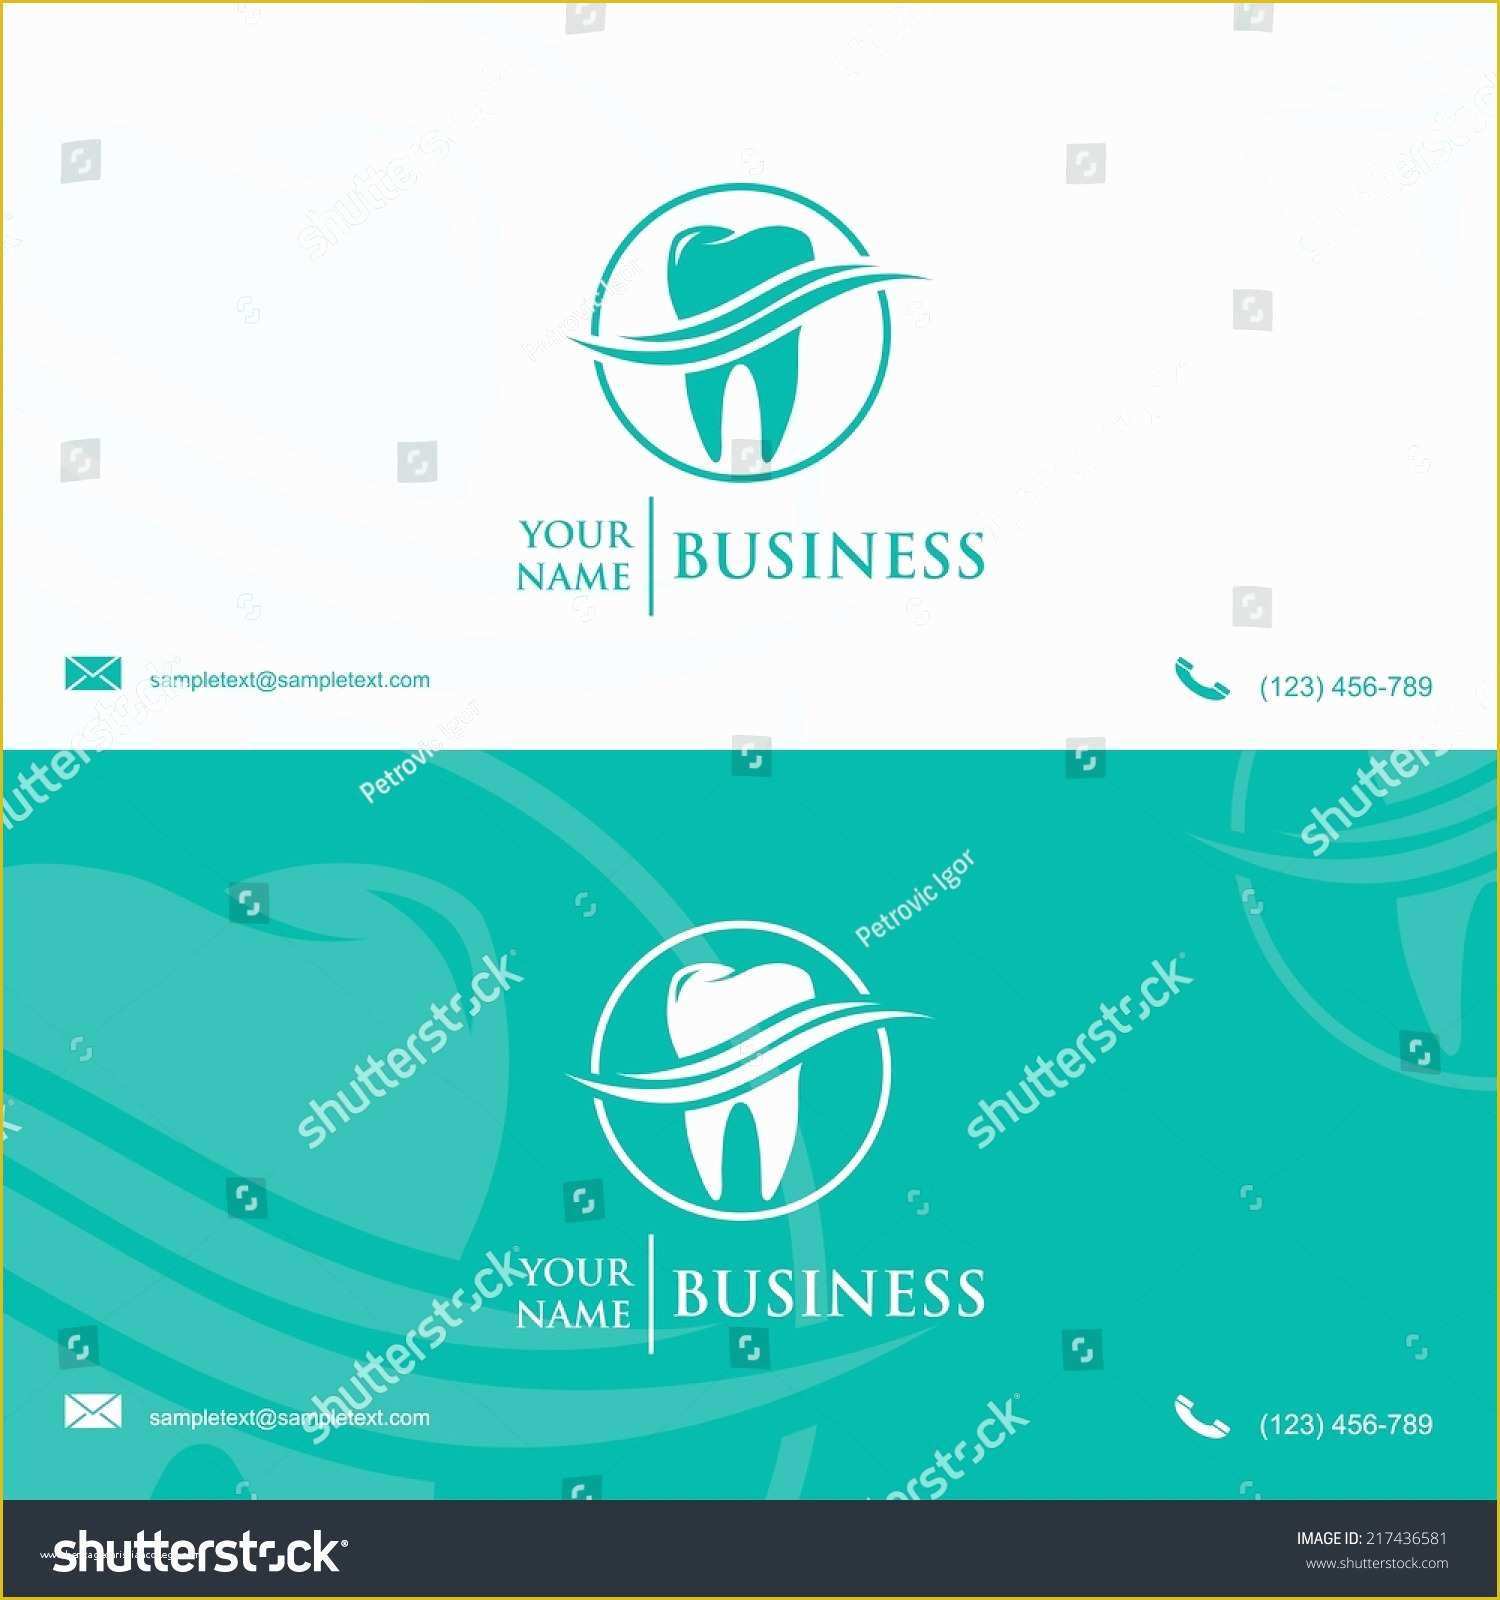 Dentist Business Card Template Free Of Best Dentist Business Card Template Free